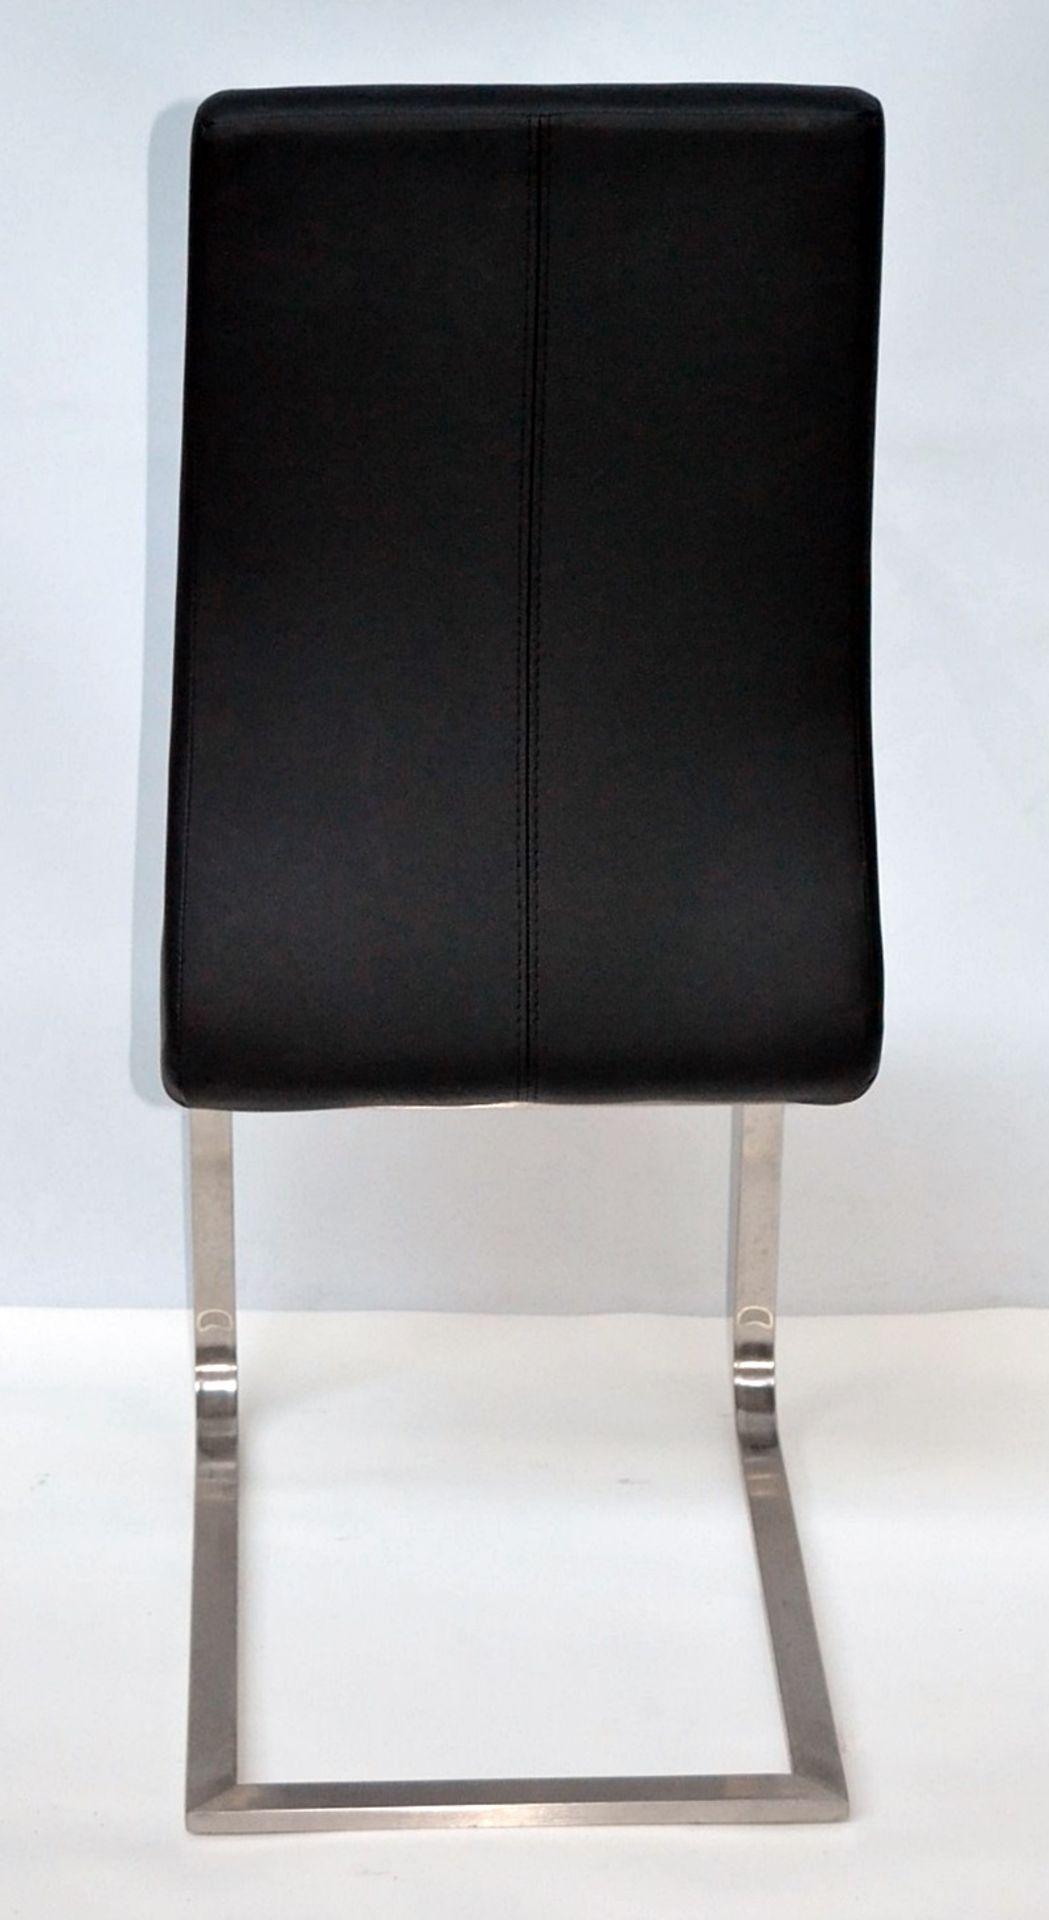 4 x Black Soft Leather Dining Chairs - Featuring A Curved Ergonomic Design With Metal Cantilever Bas - Image 4 of 4